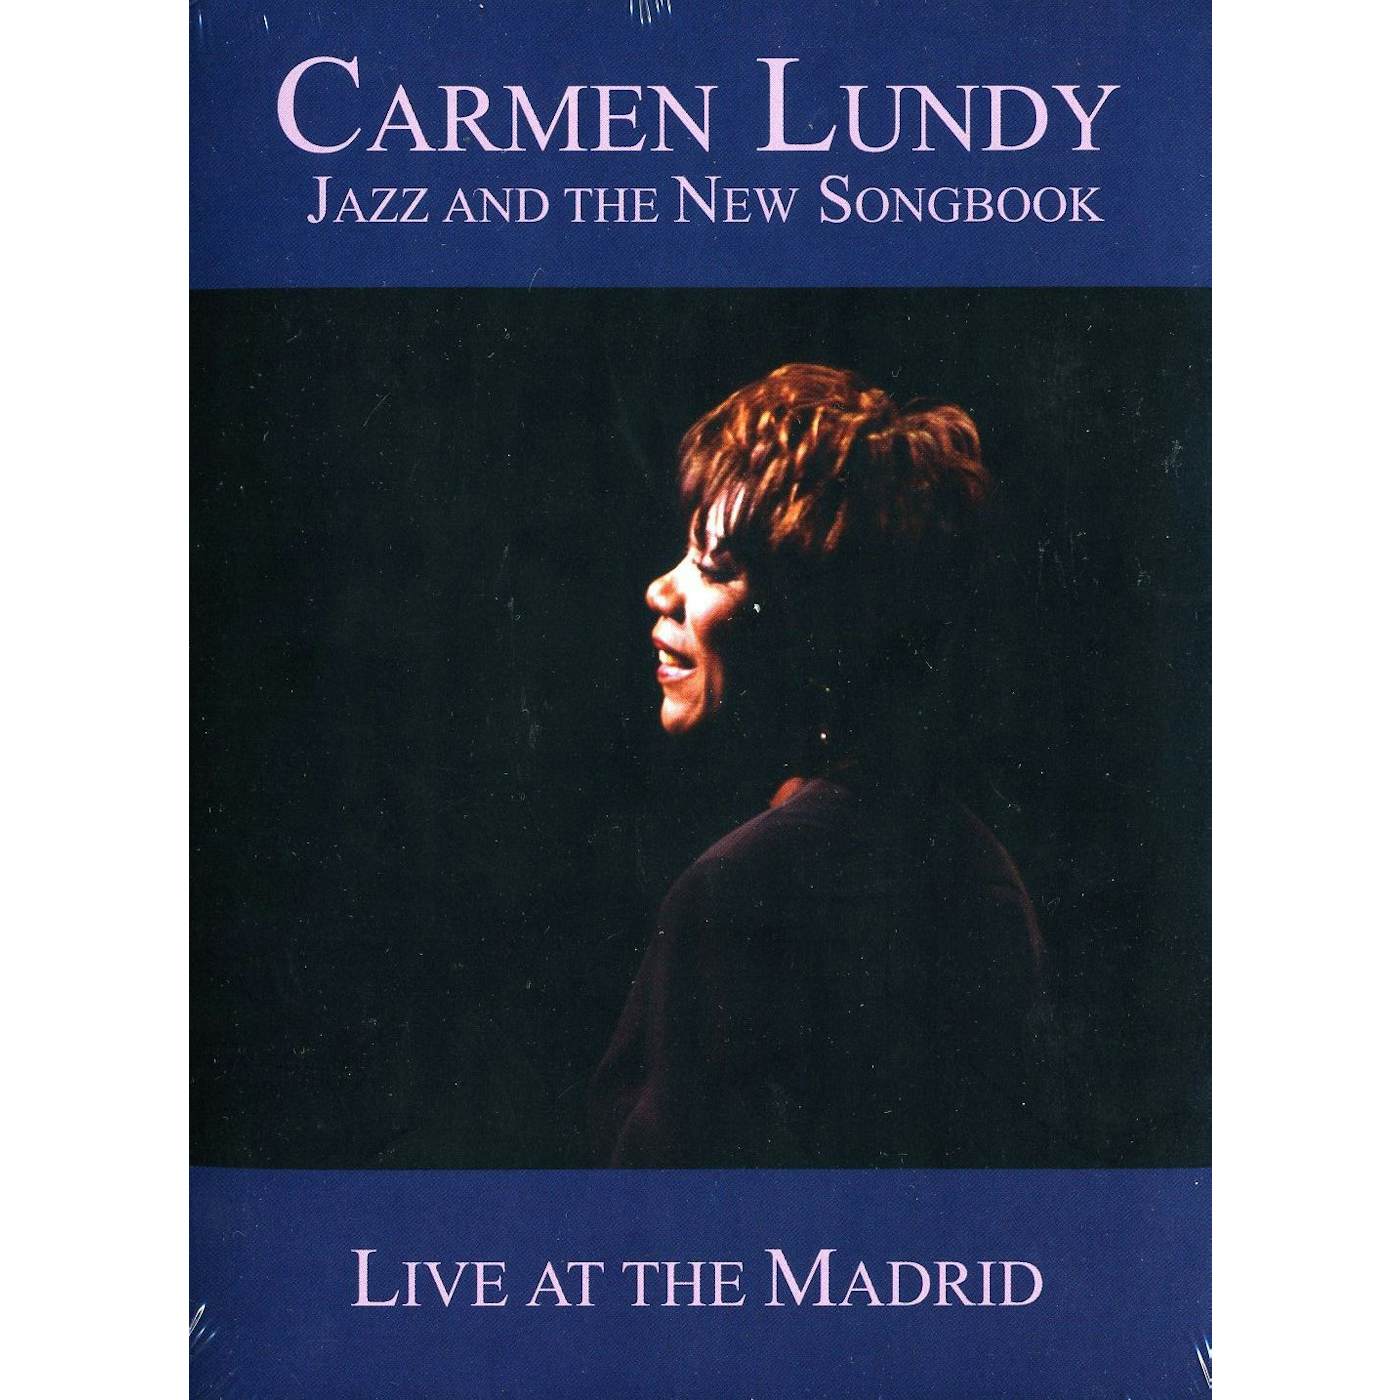 Carmen Lundy JAZZ & THE NEW SONGBOOK: LIVE AT THE MADRID DVD